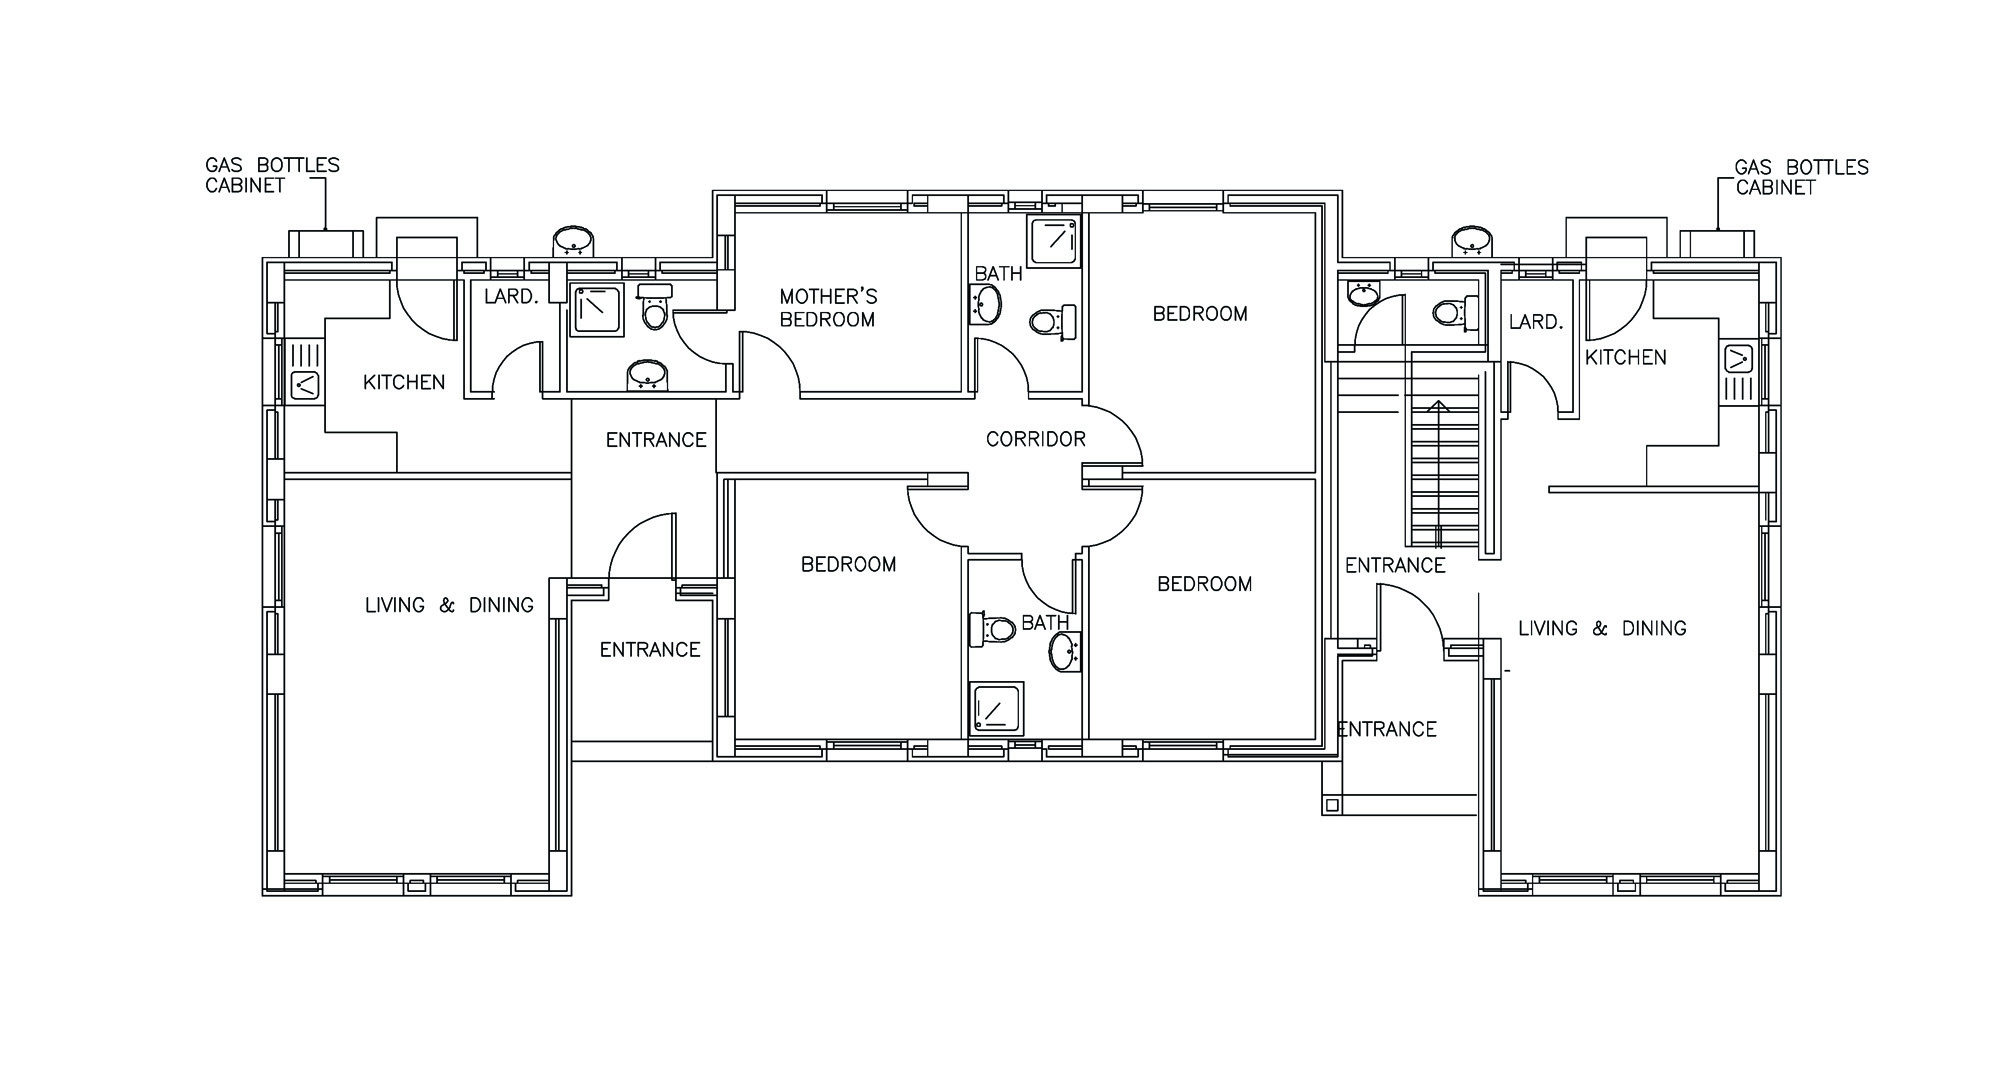 Ground floor plan, typical family house